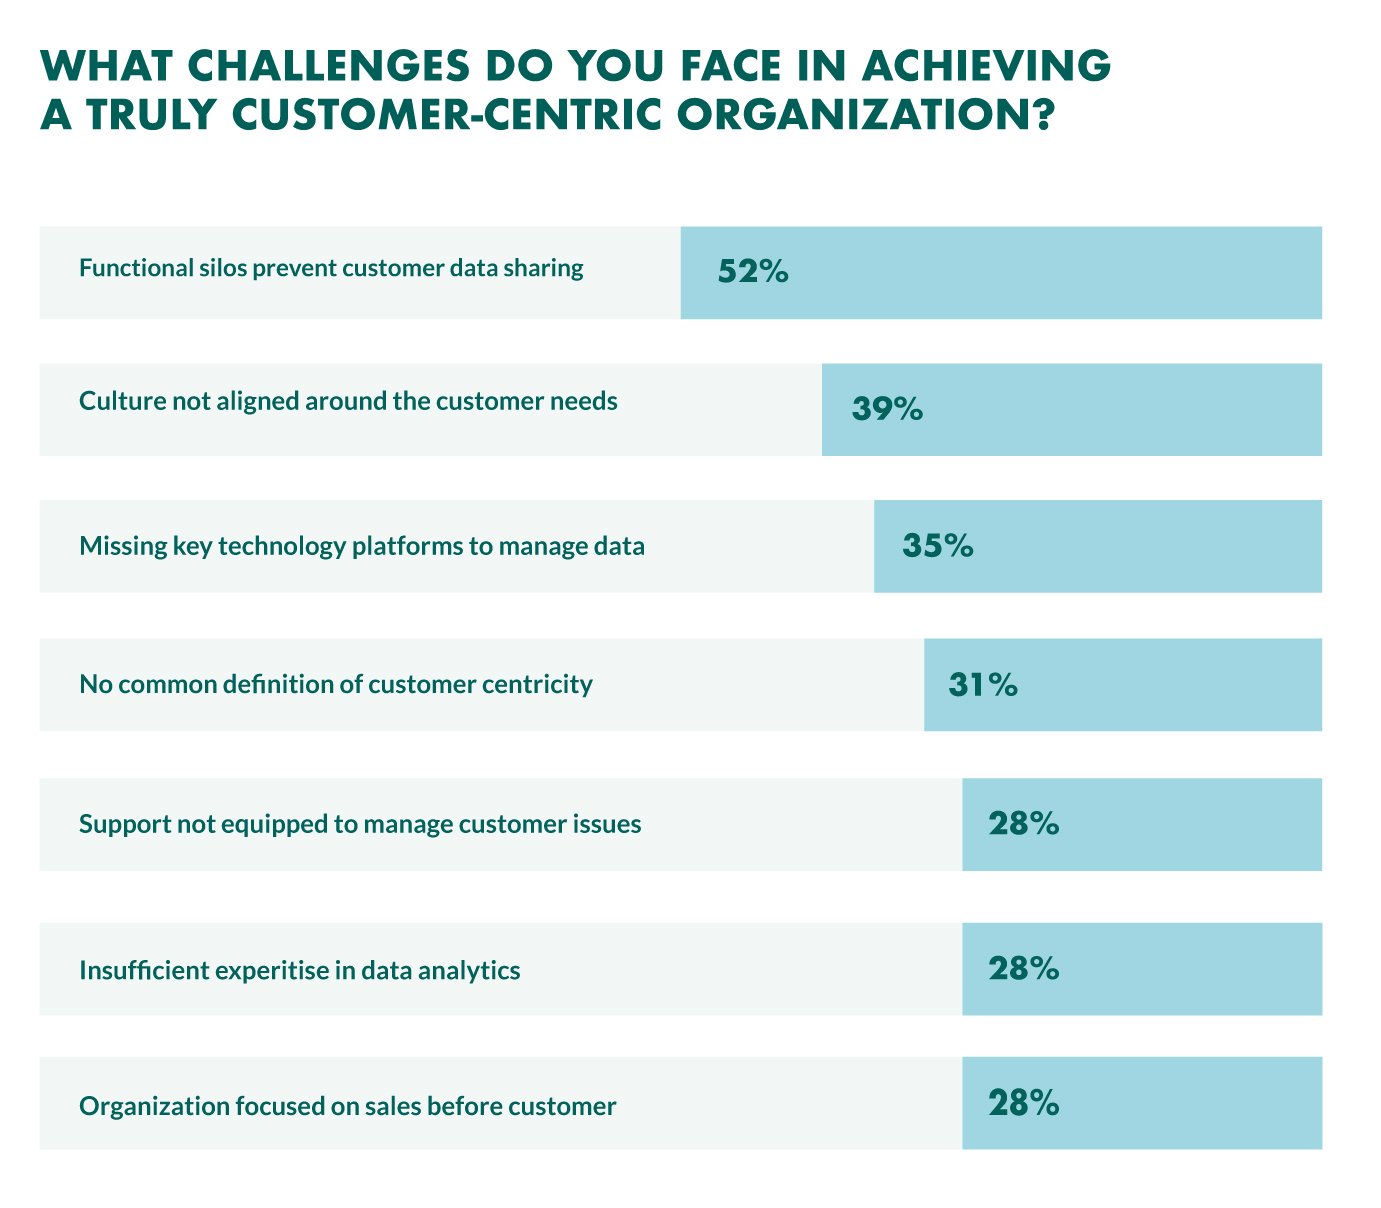 customer-centric challenges